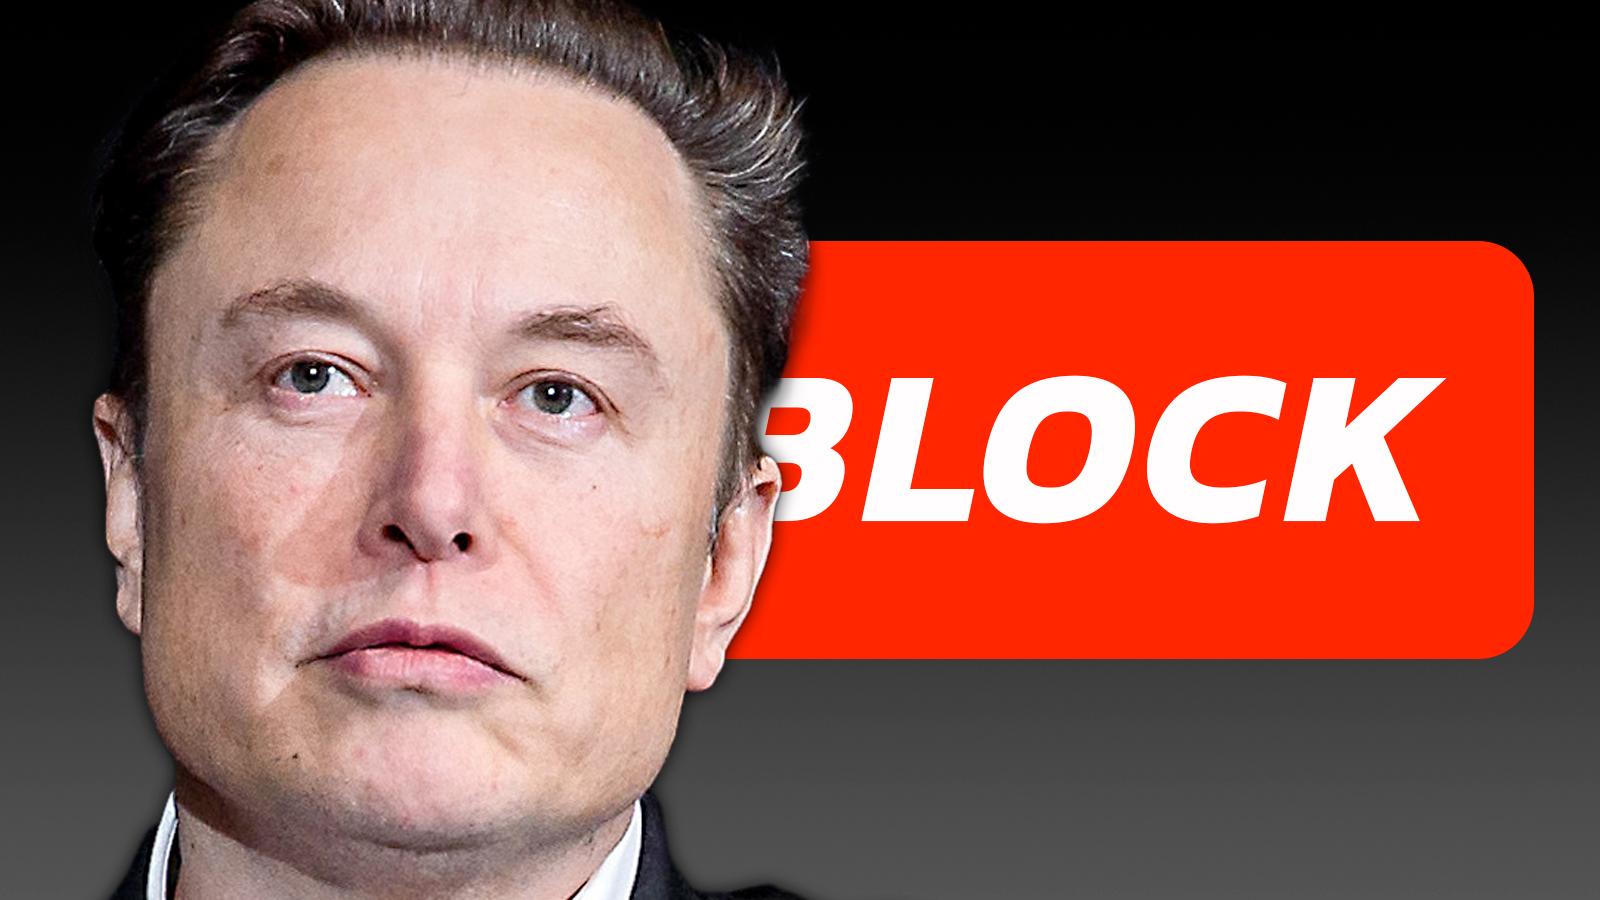 Elon Musk says Twitter/X will be removing block feature - Dexerto